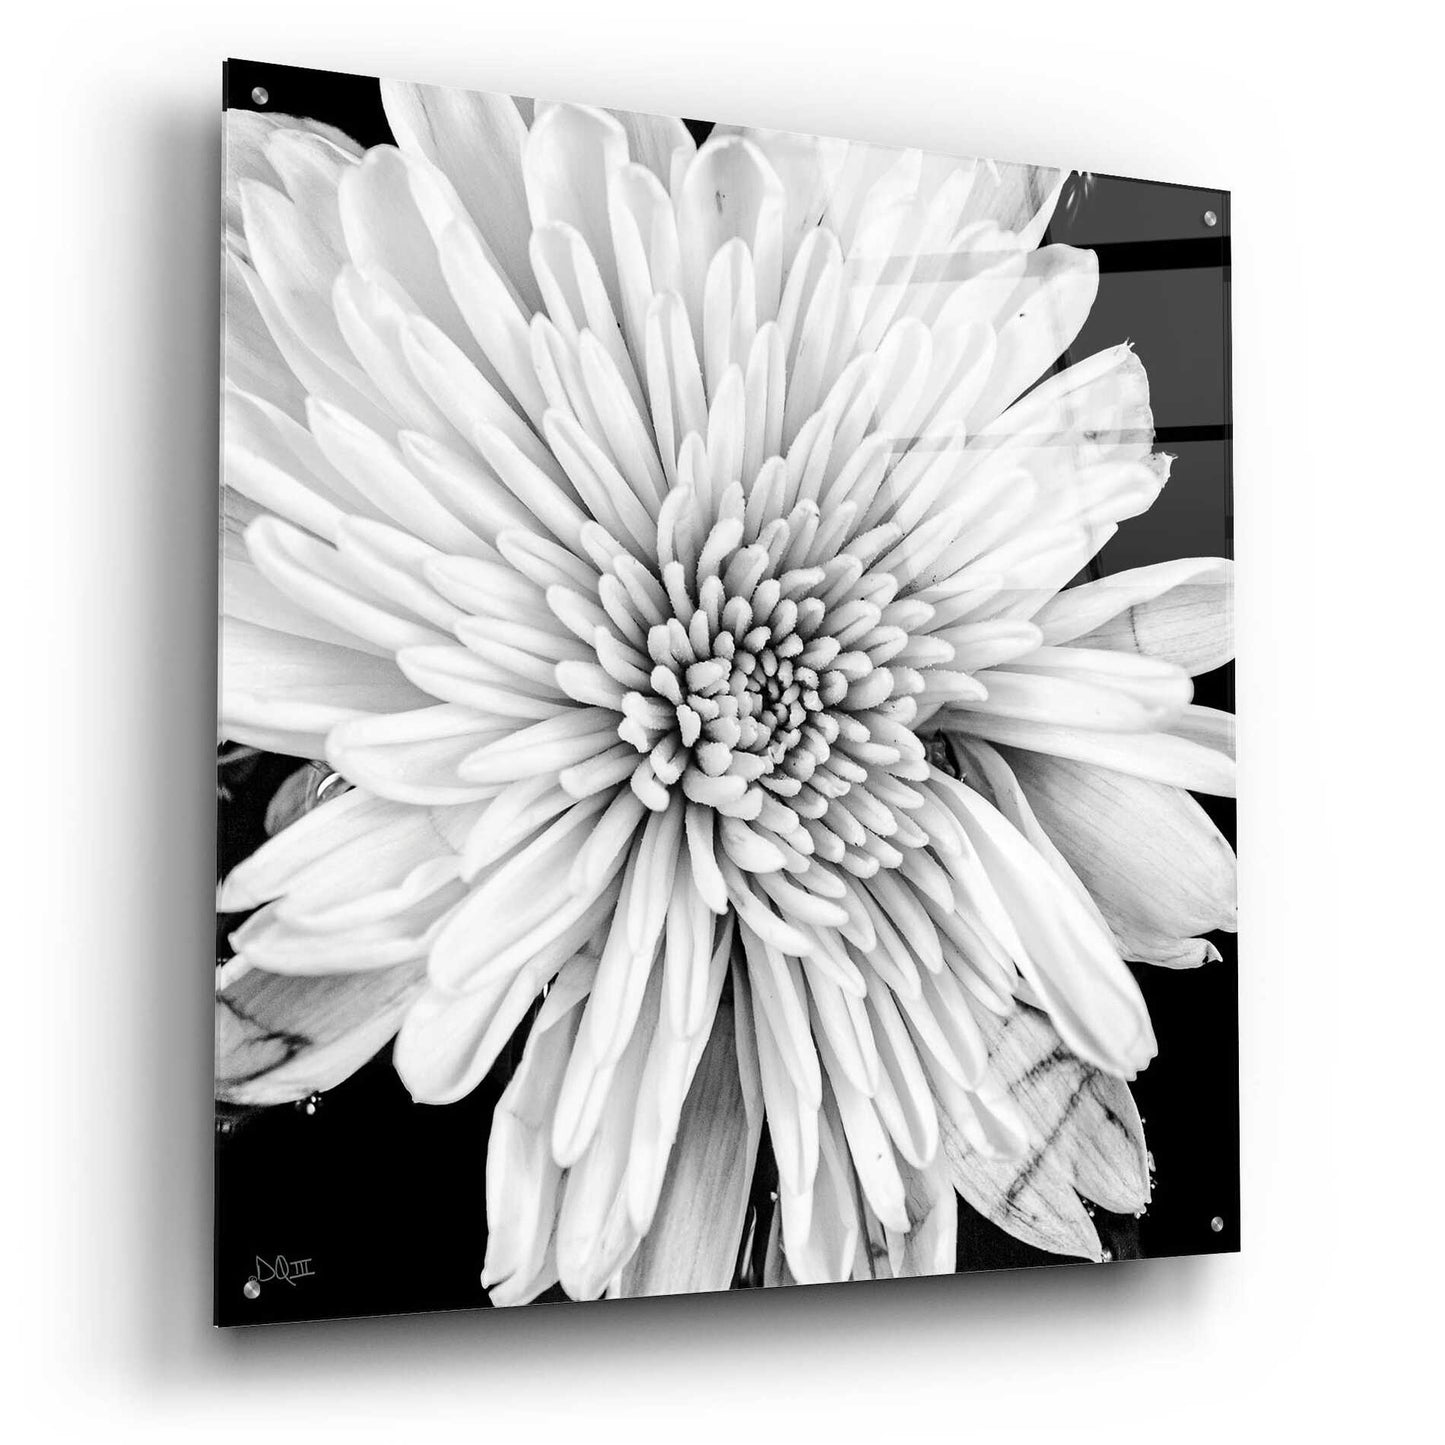 Epic Art 'Black and White Love II' by Donnie Quillen, Acrylic Glass Wall Art,36x36